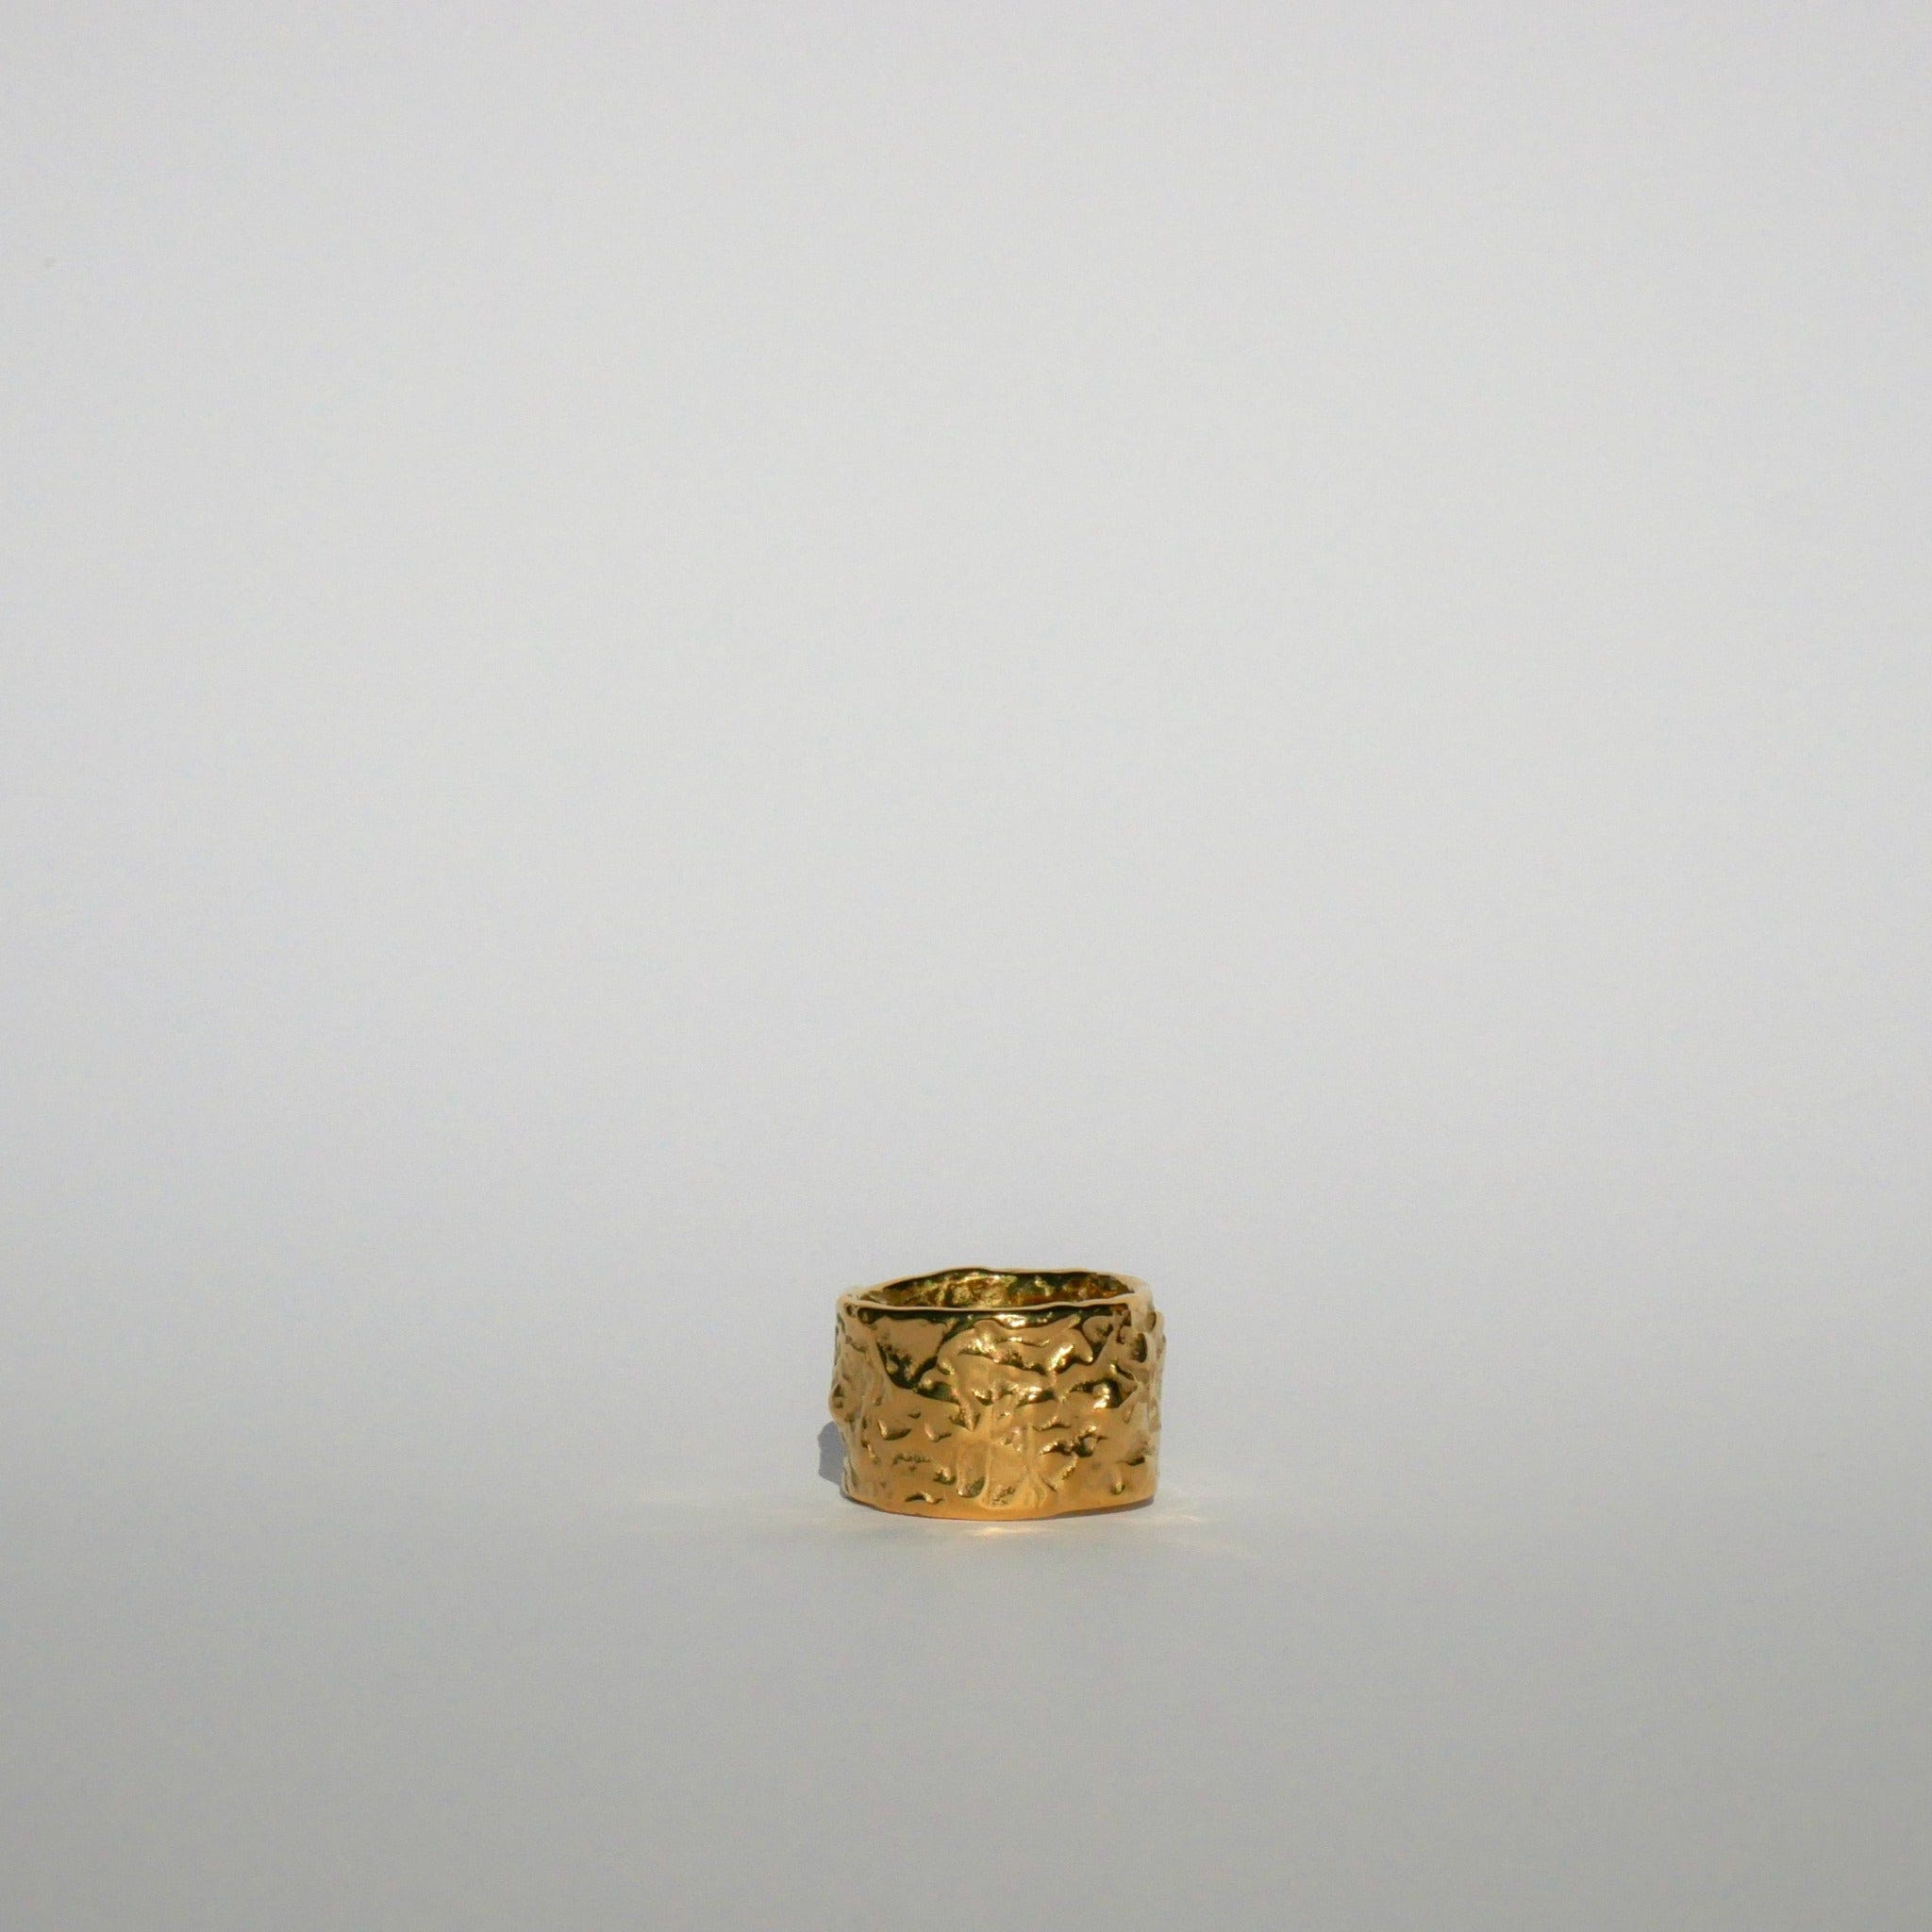 Lara Hammered Ring NEW by Koréil Jewelry